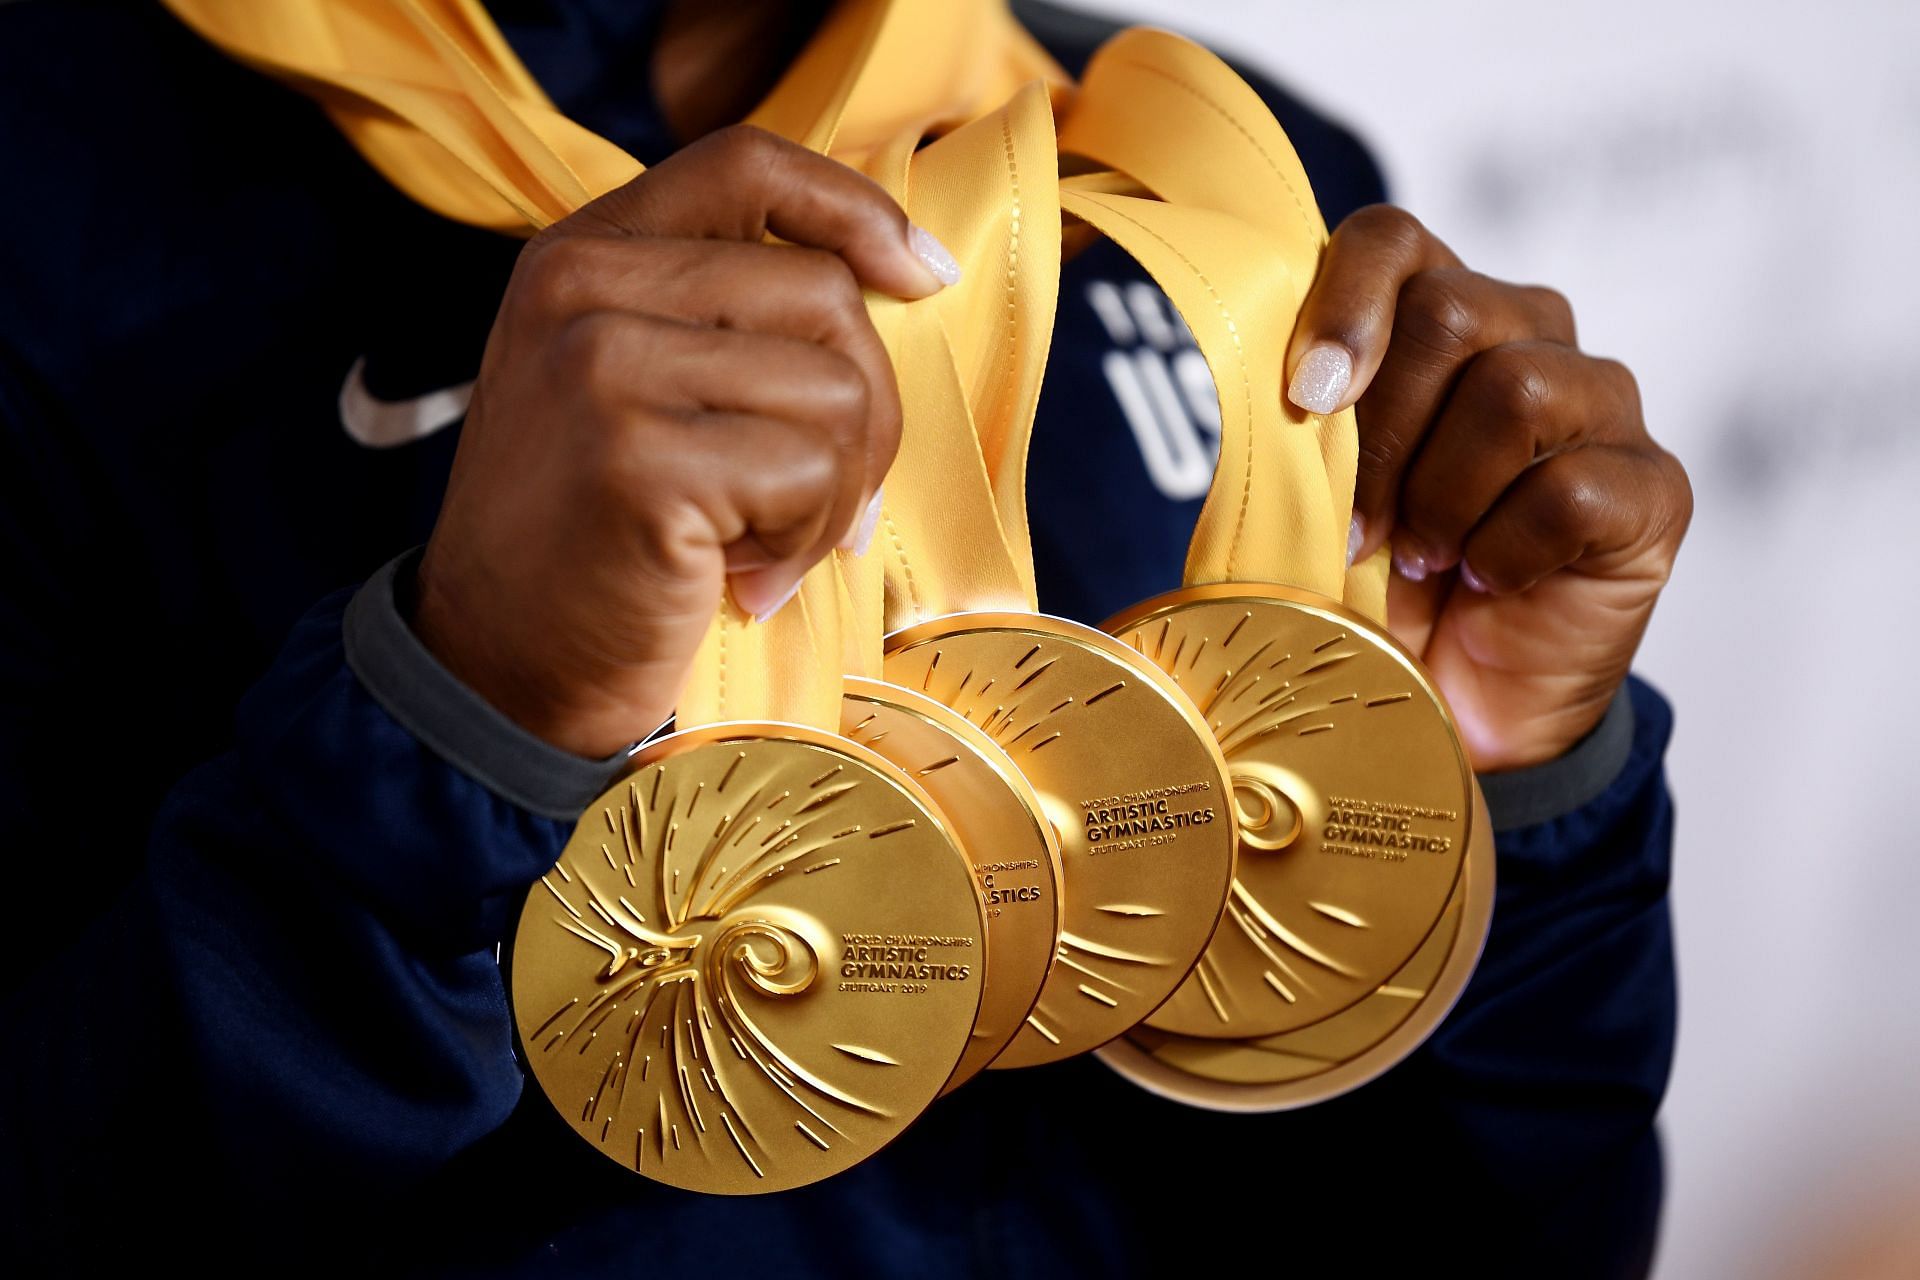 Biles with her multiple gold medals at the 49th FIG Artistic Gymnastics World Championships